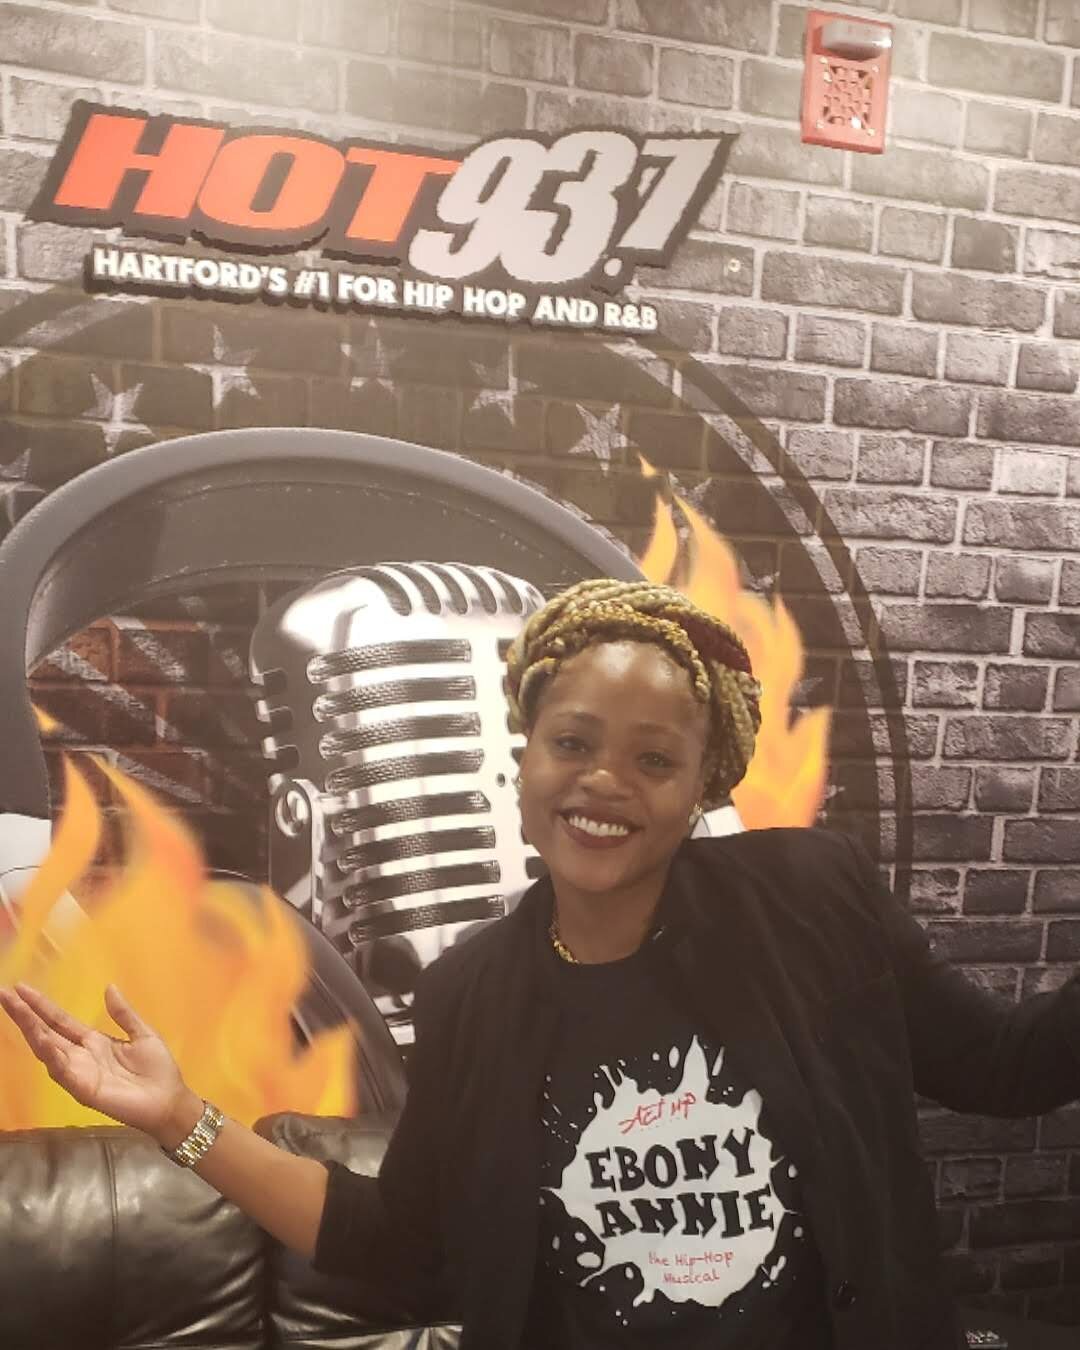  WZMX, better known as "Hot 93.7" is an urban-leaning Rhythmic Contemporary station licensed to Hartford, Connecticut, in the United States. 